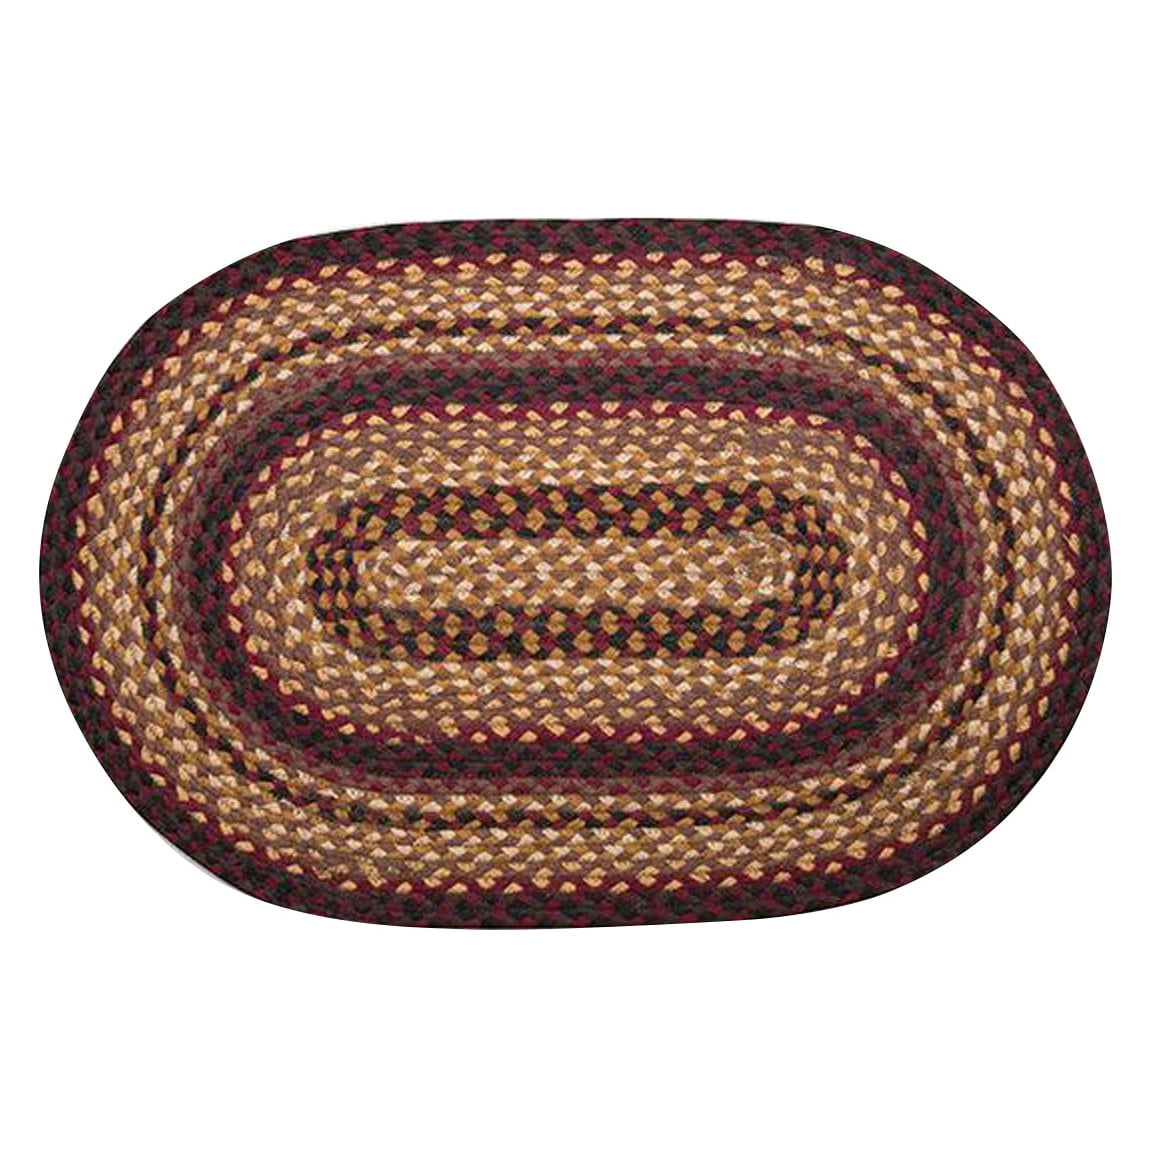 Capitol Importing 27-371 5 x 8 ft. Oblong Braided Rug, Black Cherry, Chocolate & Cream -  Capitol Importing Company